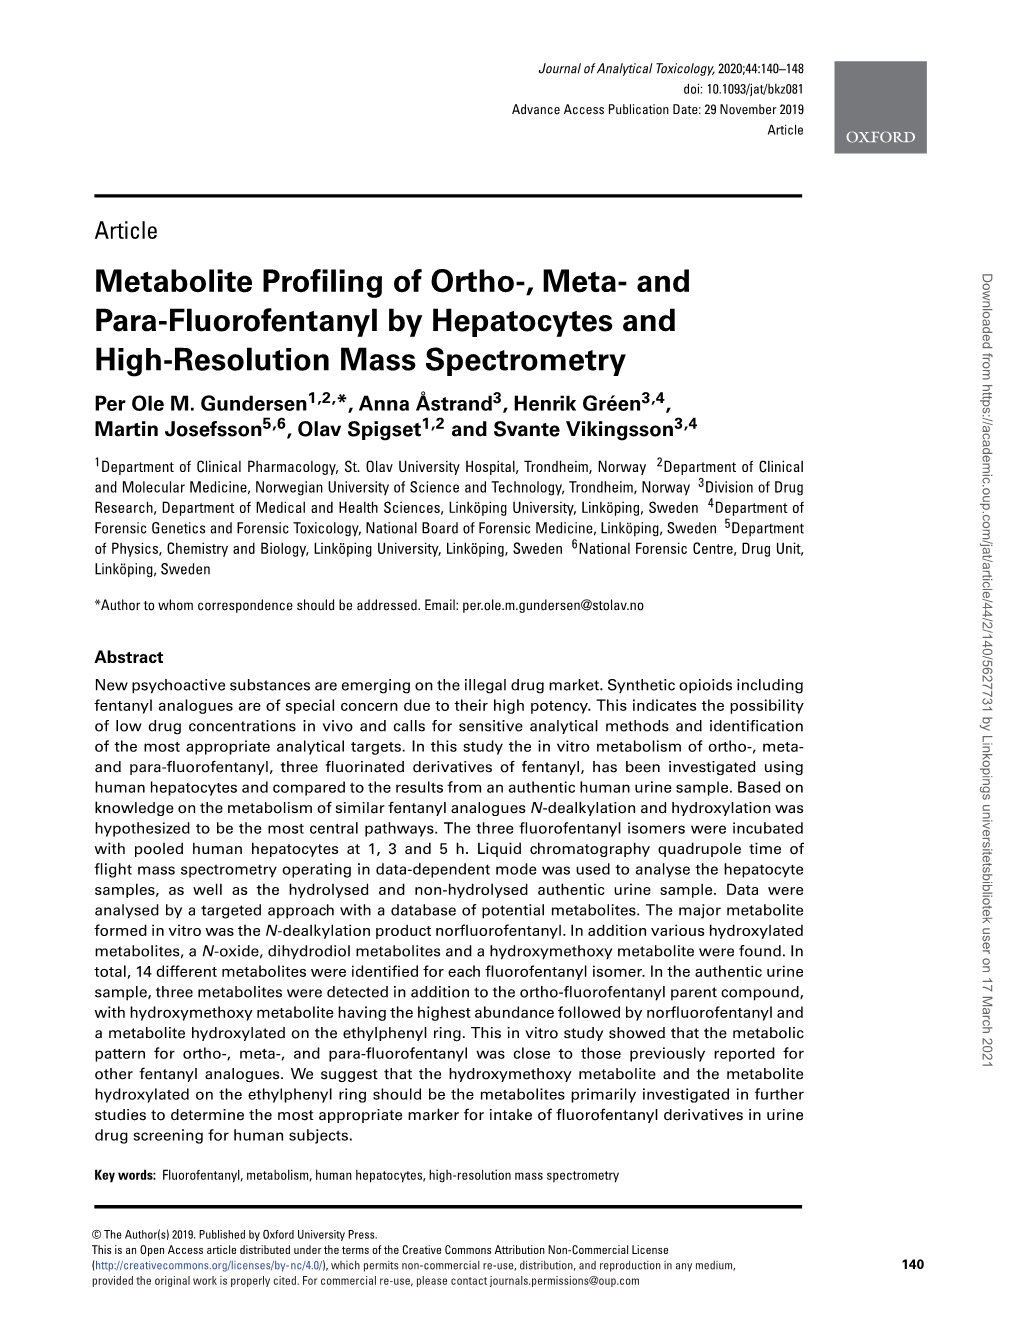 Metabolite Profiling of Ortho-, Meta- and Para-Fluorofentanyl By